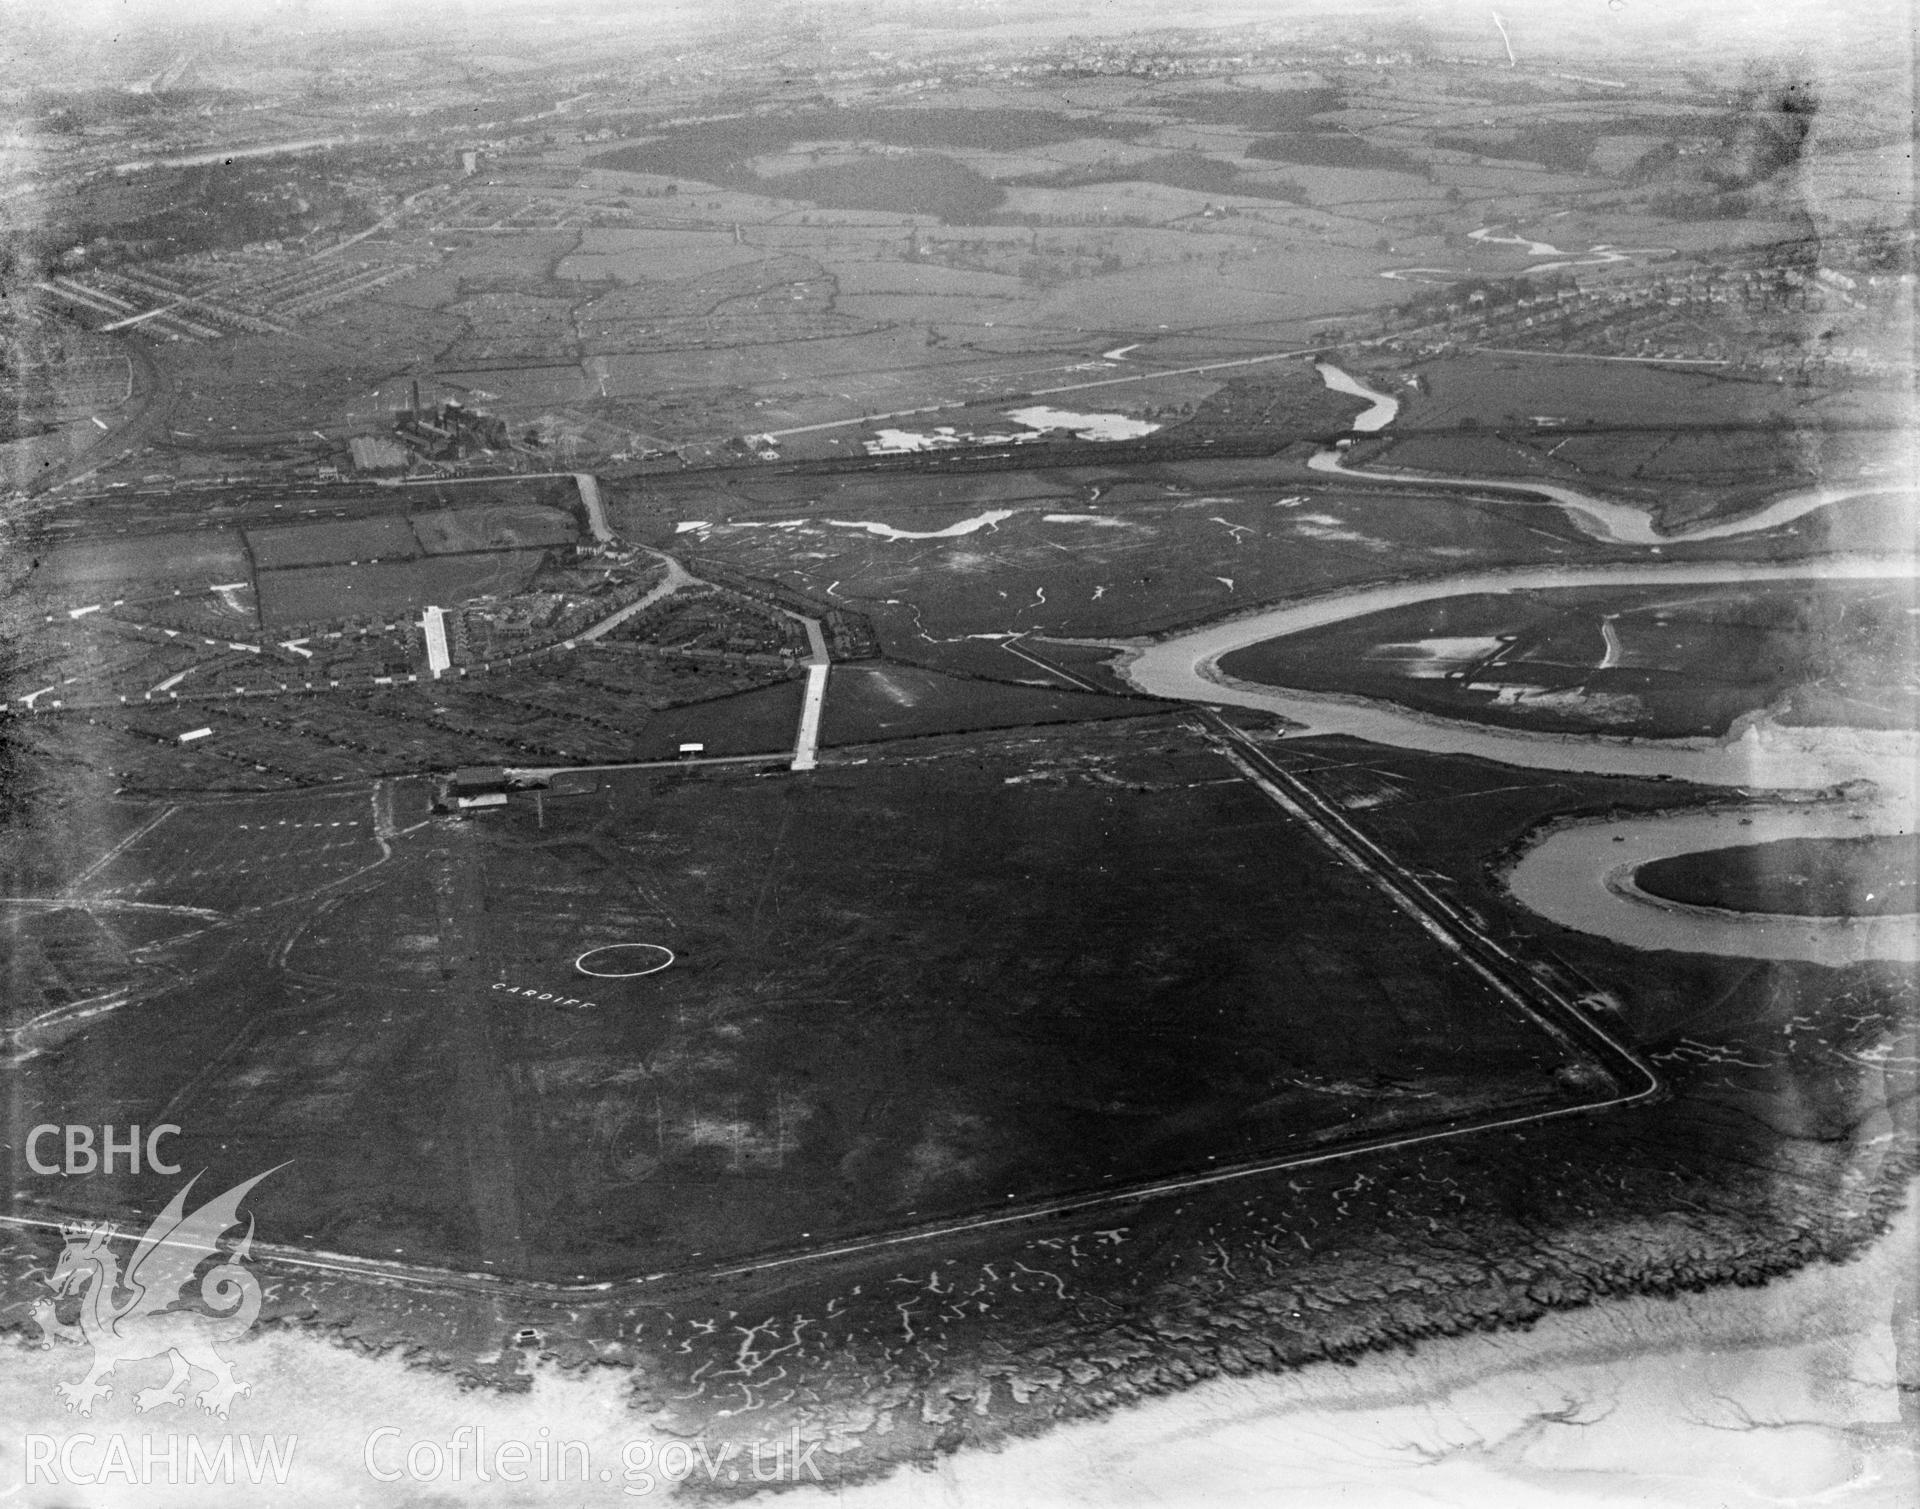 View of Cardiff Airport, Splott, oblique aerial view. 5?x4? black and white glass plate negative.